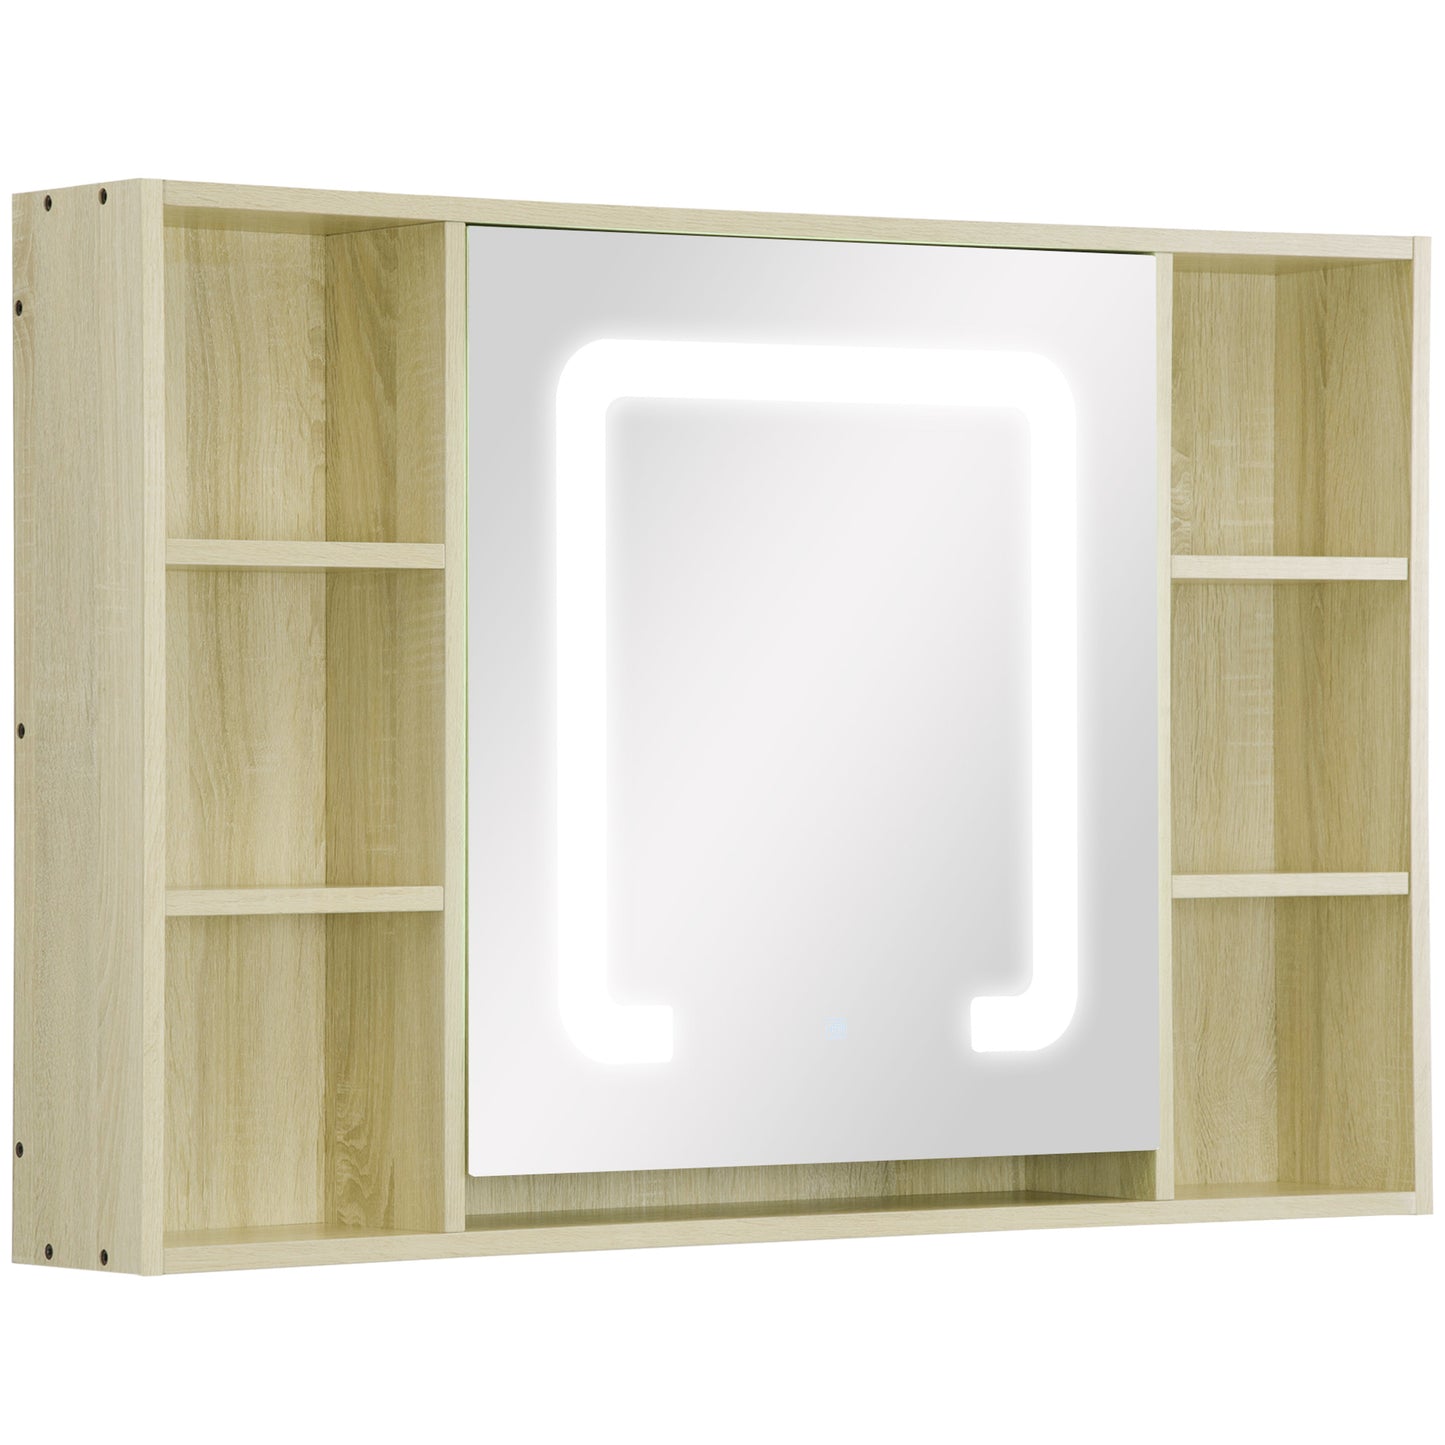 kleankin LED Bathroom Mirror Cabinet, Wall Mounted Dimmable Medicine Cabinet with Adjustable Shelf and Mirrored Door, Memory Function, USB Charge, Natural